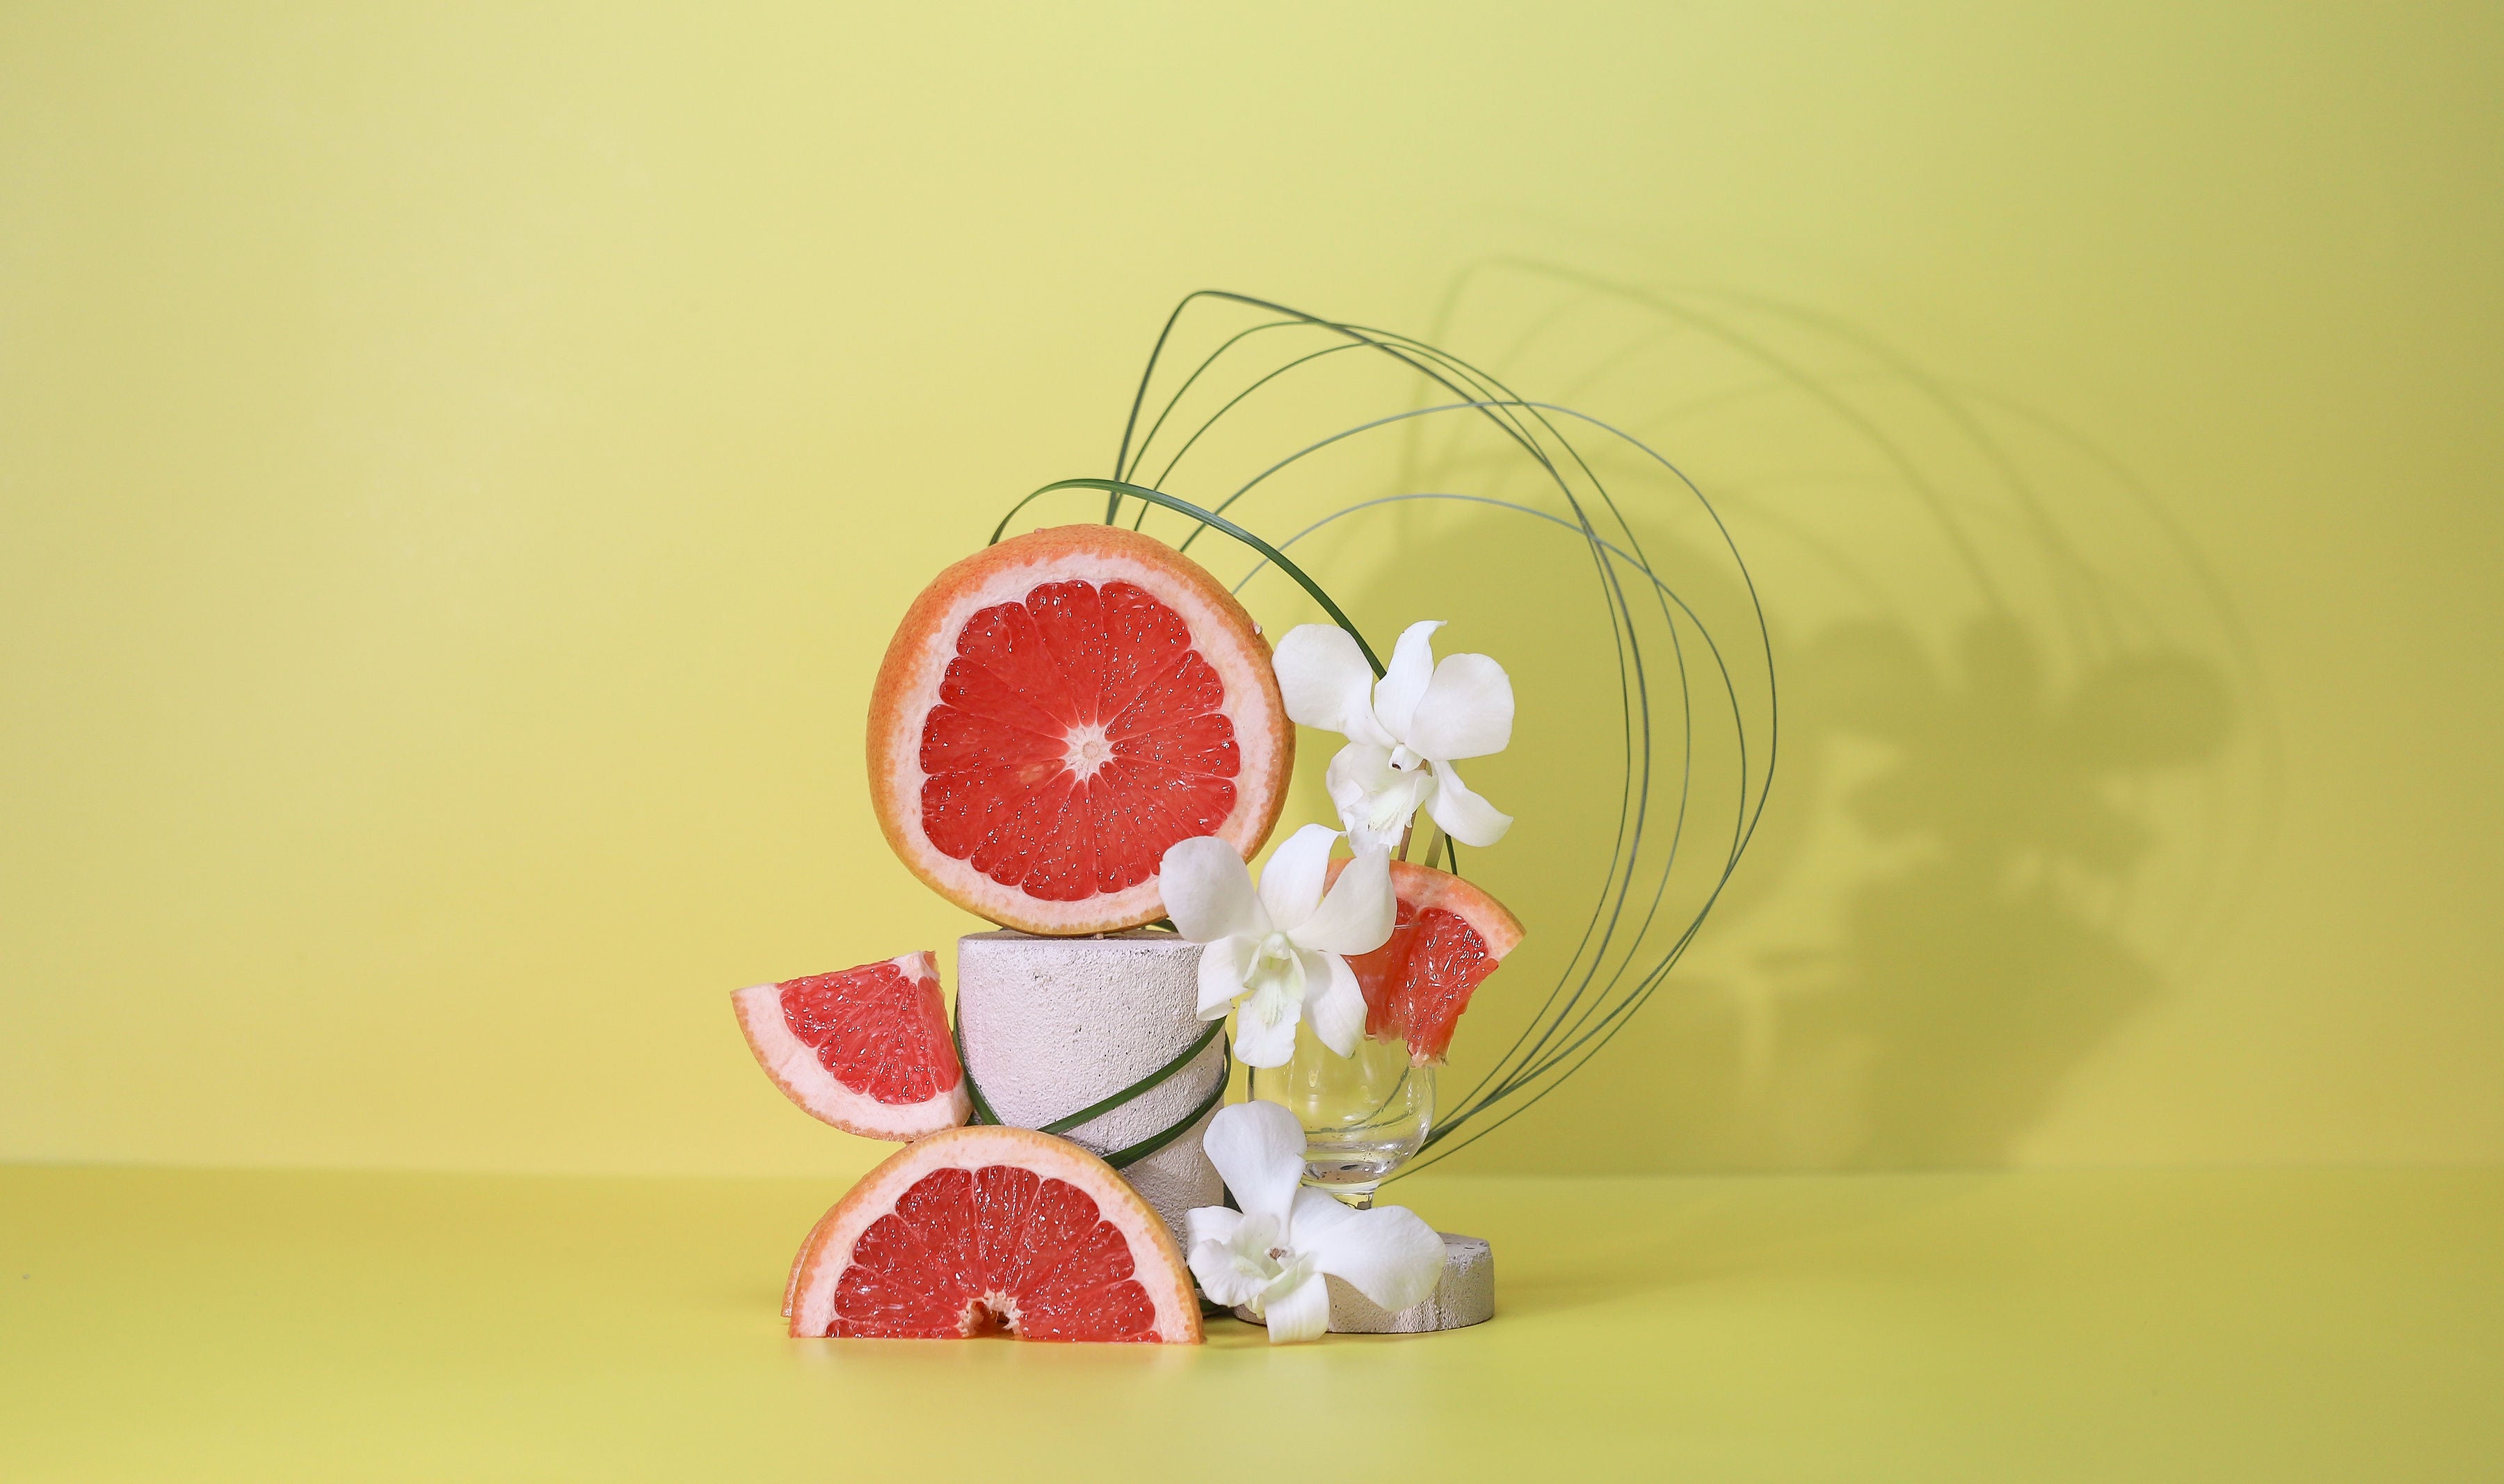 Grapefruit stacked with white flowers and long grass